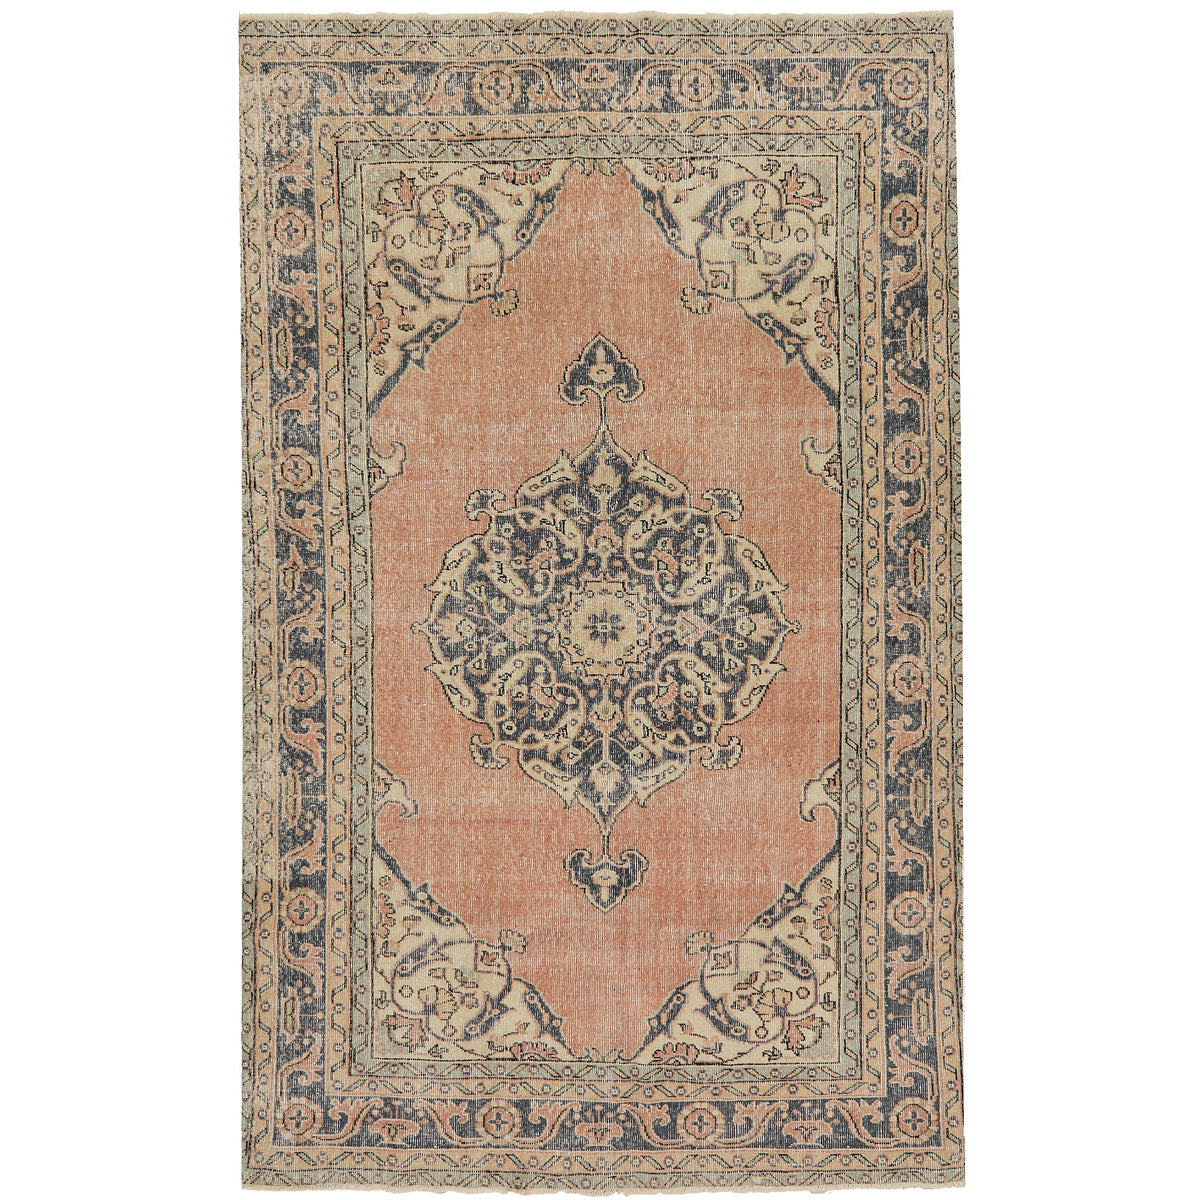 Miabella - Turkish Rug Excellence Embodied